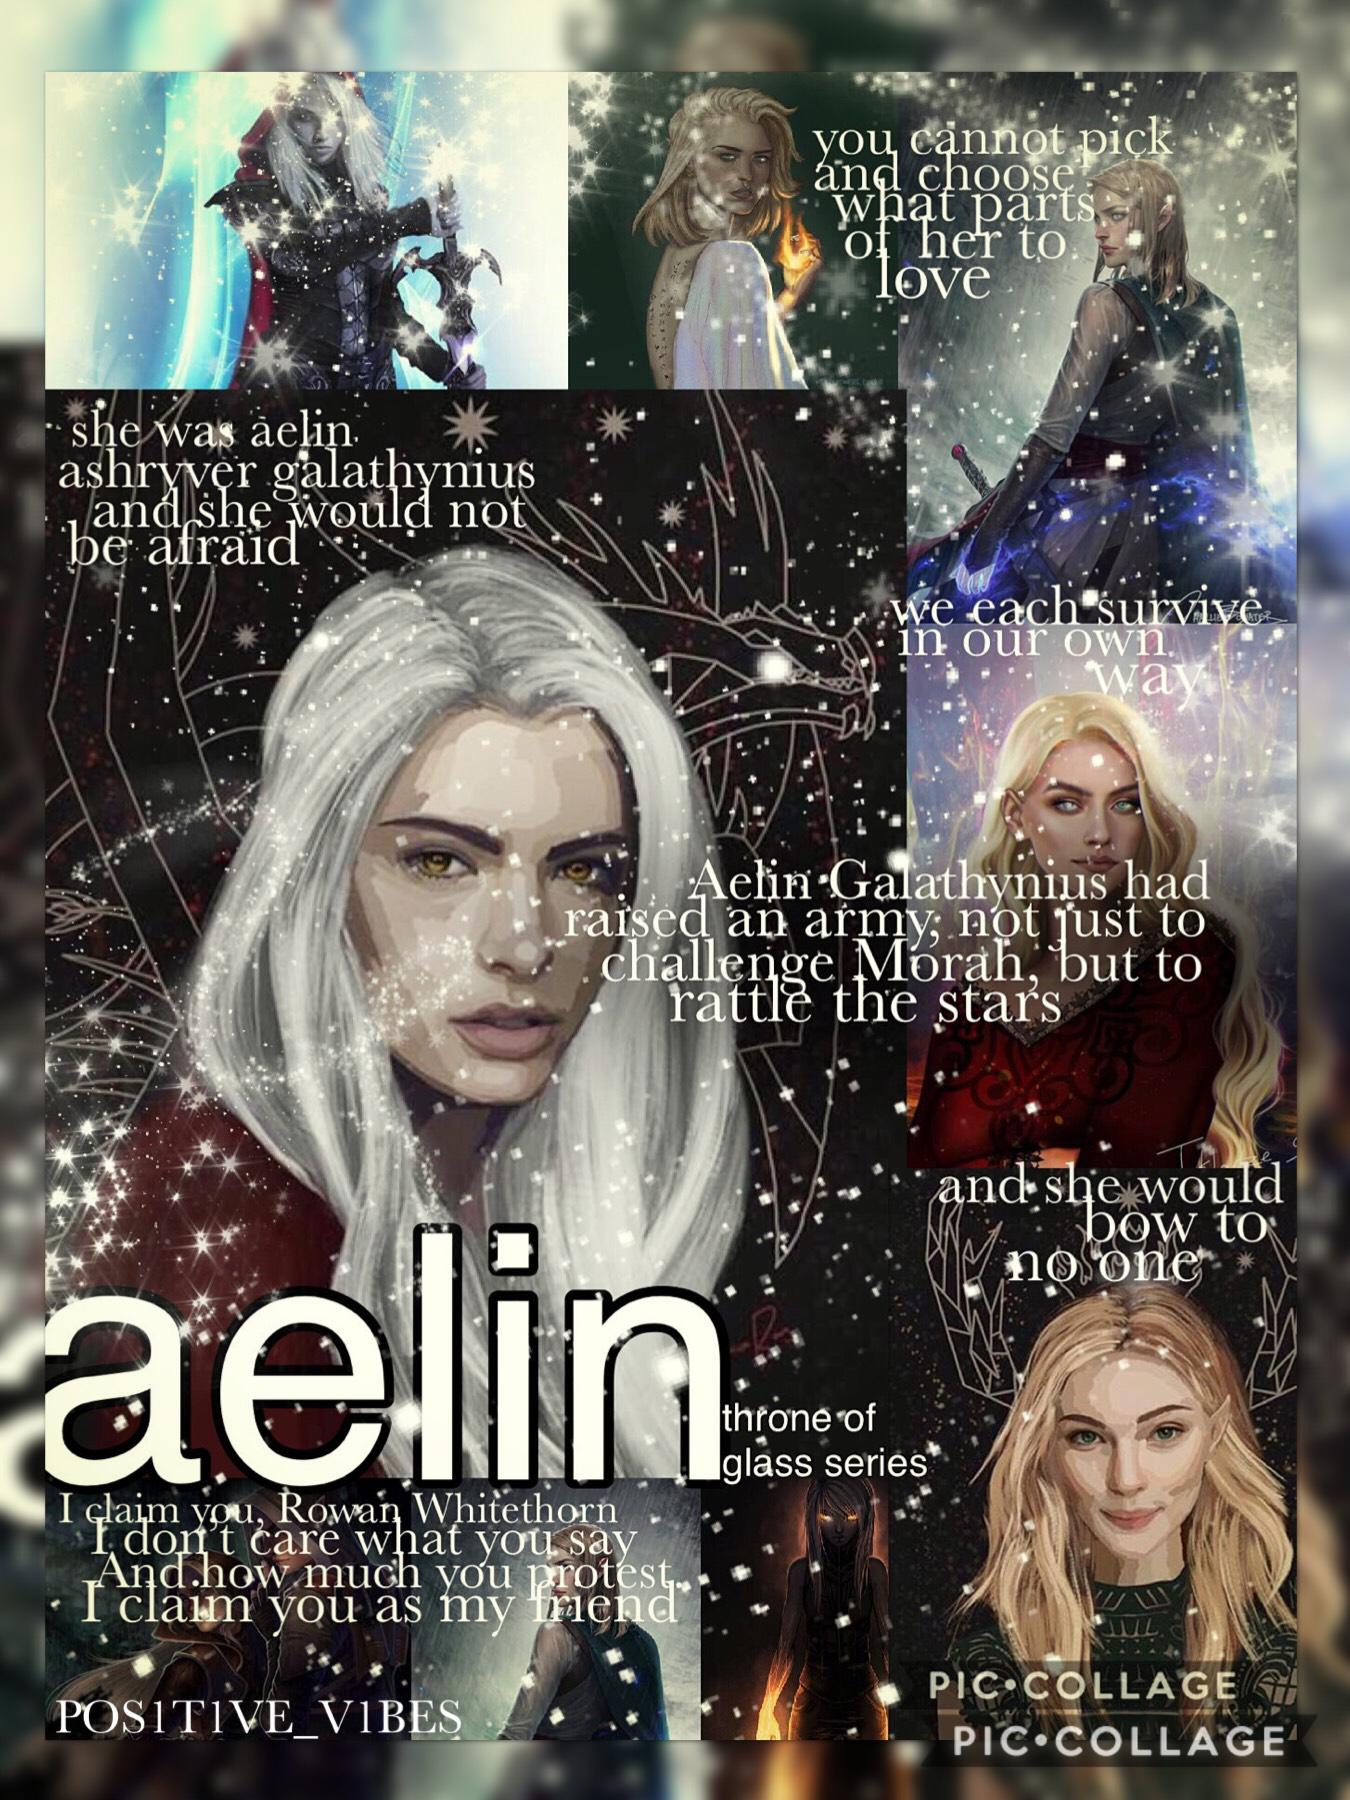 🔥Aelin Galathynius🔥Throne Of Glass Series - gO READ IT!1!🔥Track might start Monday or Tuesday it depends, & I have rehearsal on Tuesday so that’s great🔥ahaha Aelins power is fire🔥ROWAELIN🔥
#PCONLY
#AELIN
#&ROWAN
#FIRE
#TRACK
#REHEARSAL
#ROWAELIN
#THRONE
#